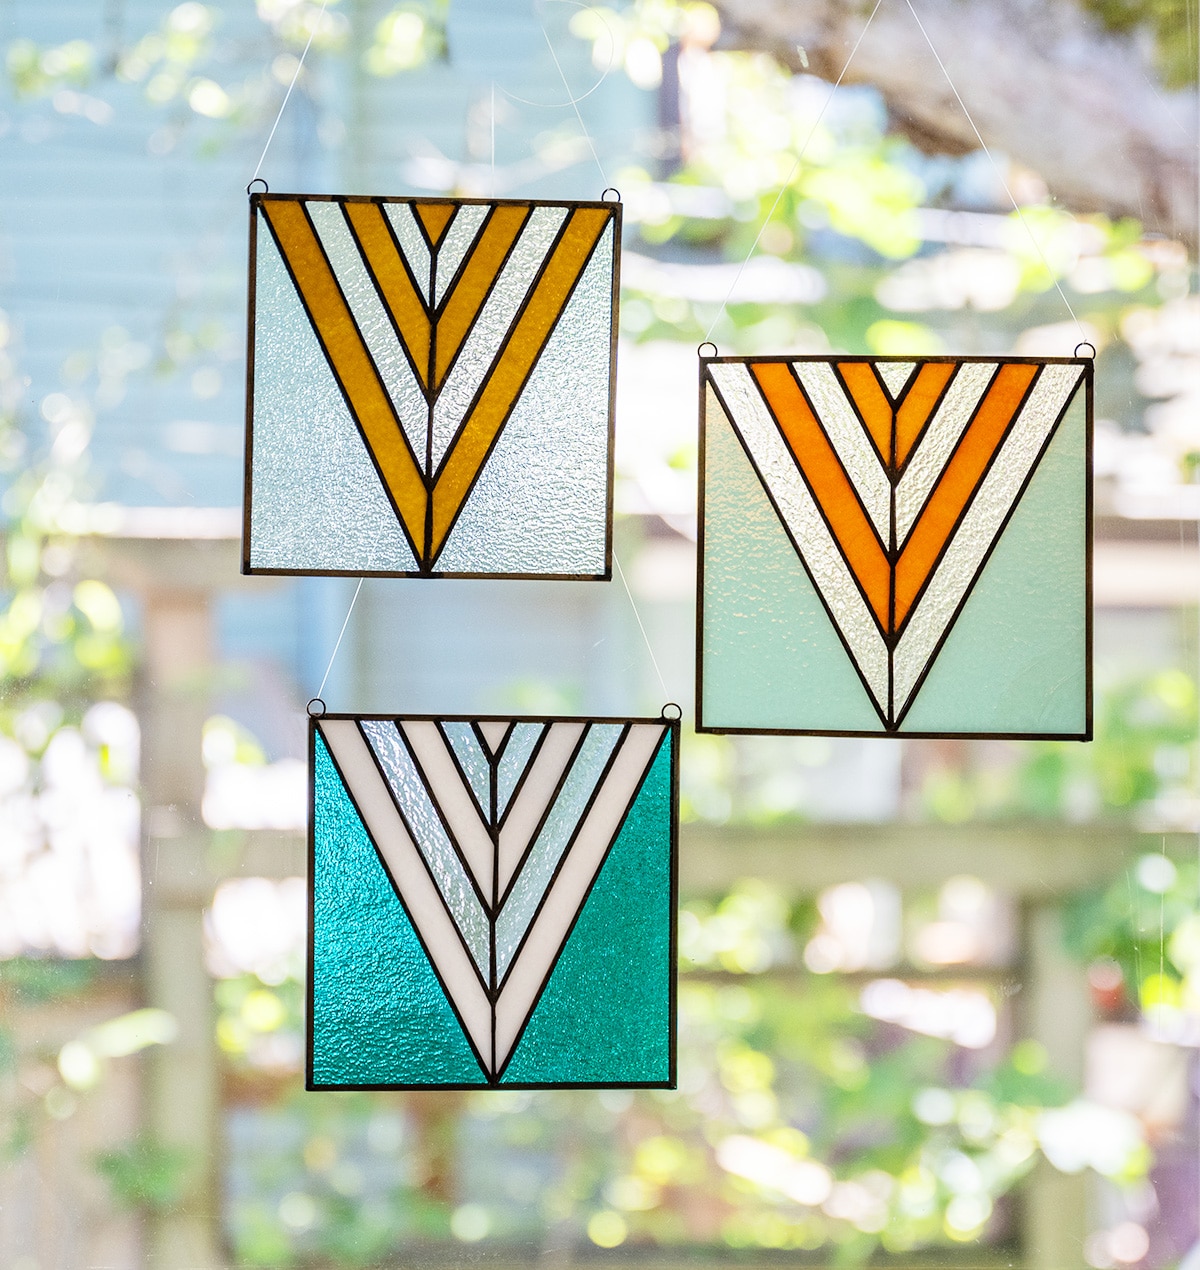 stained glass pendants in a window